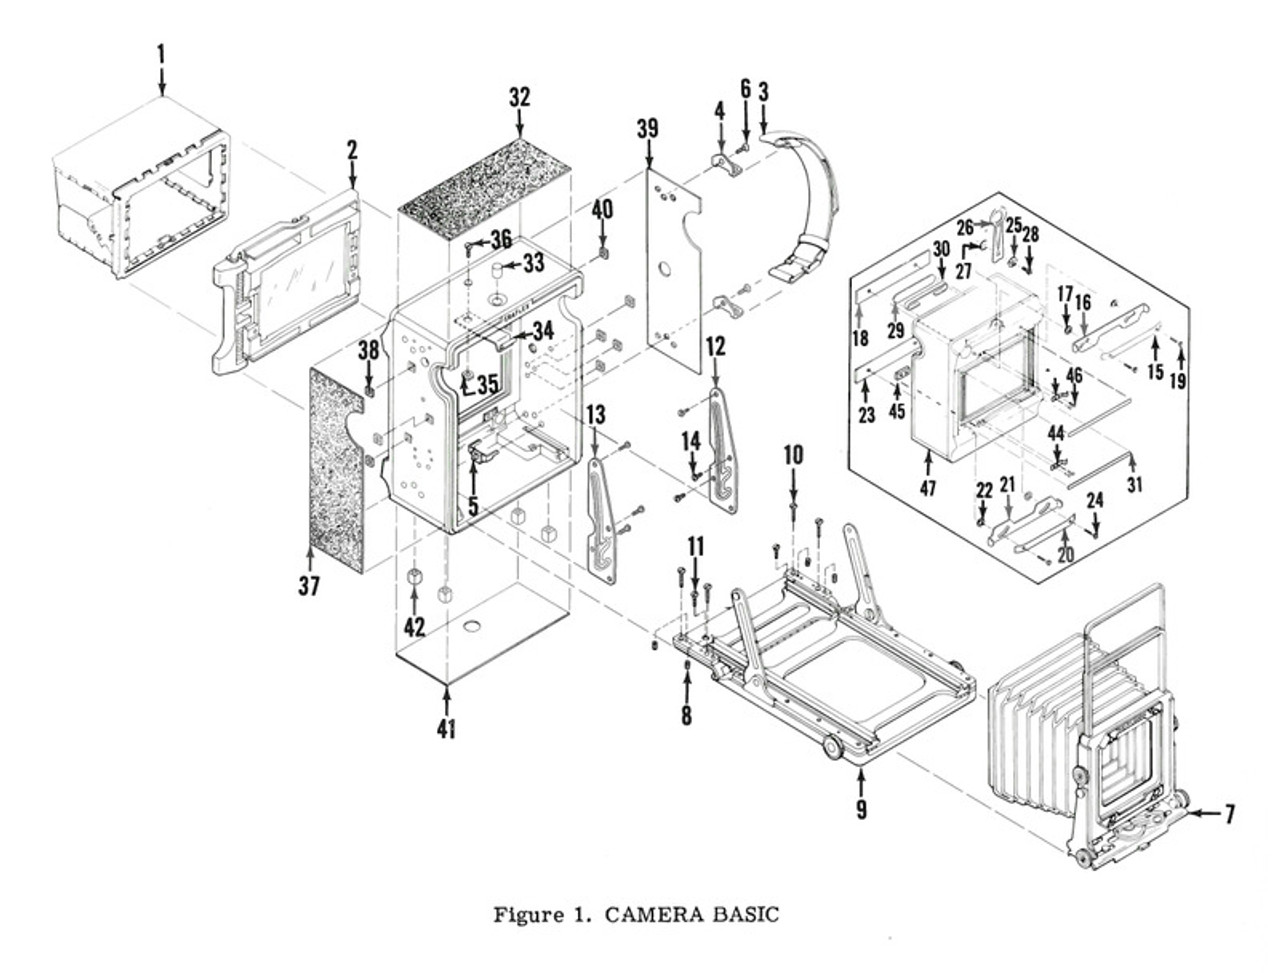 SECTION 12 - Century Graphic Service Instructions & Parts Catalog - Free Download